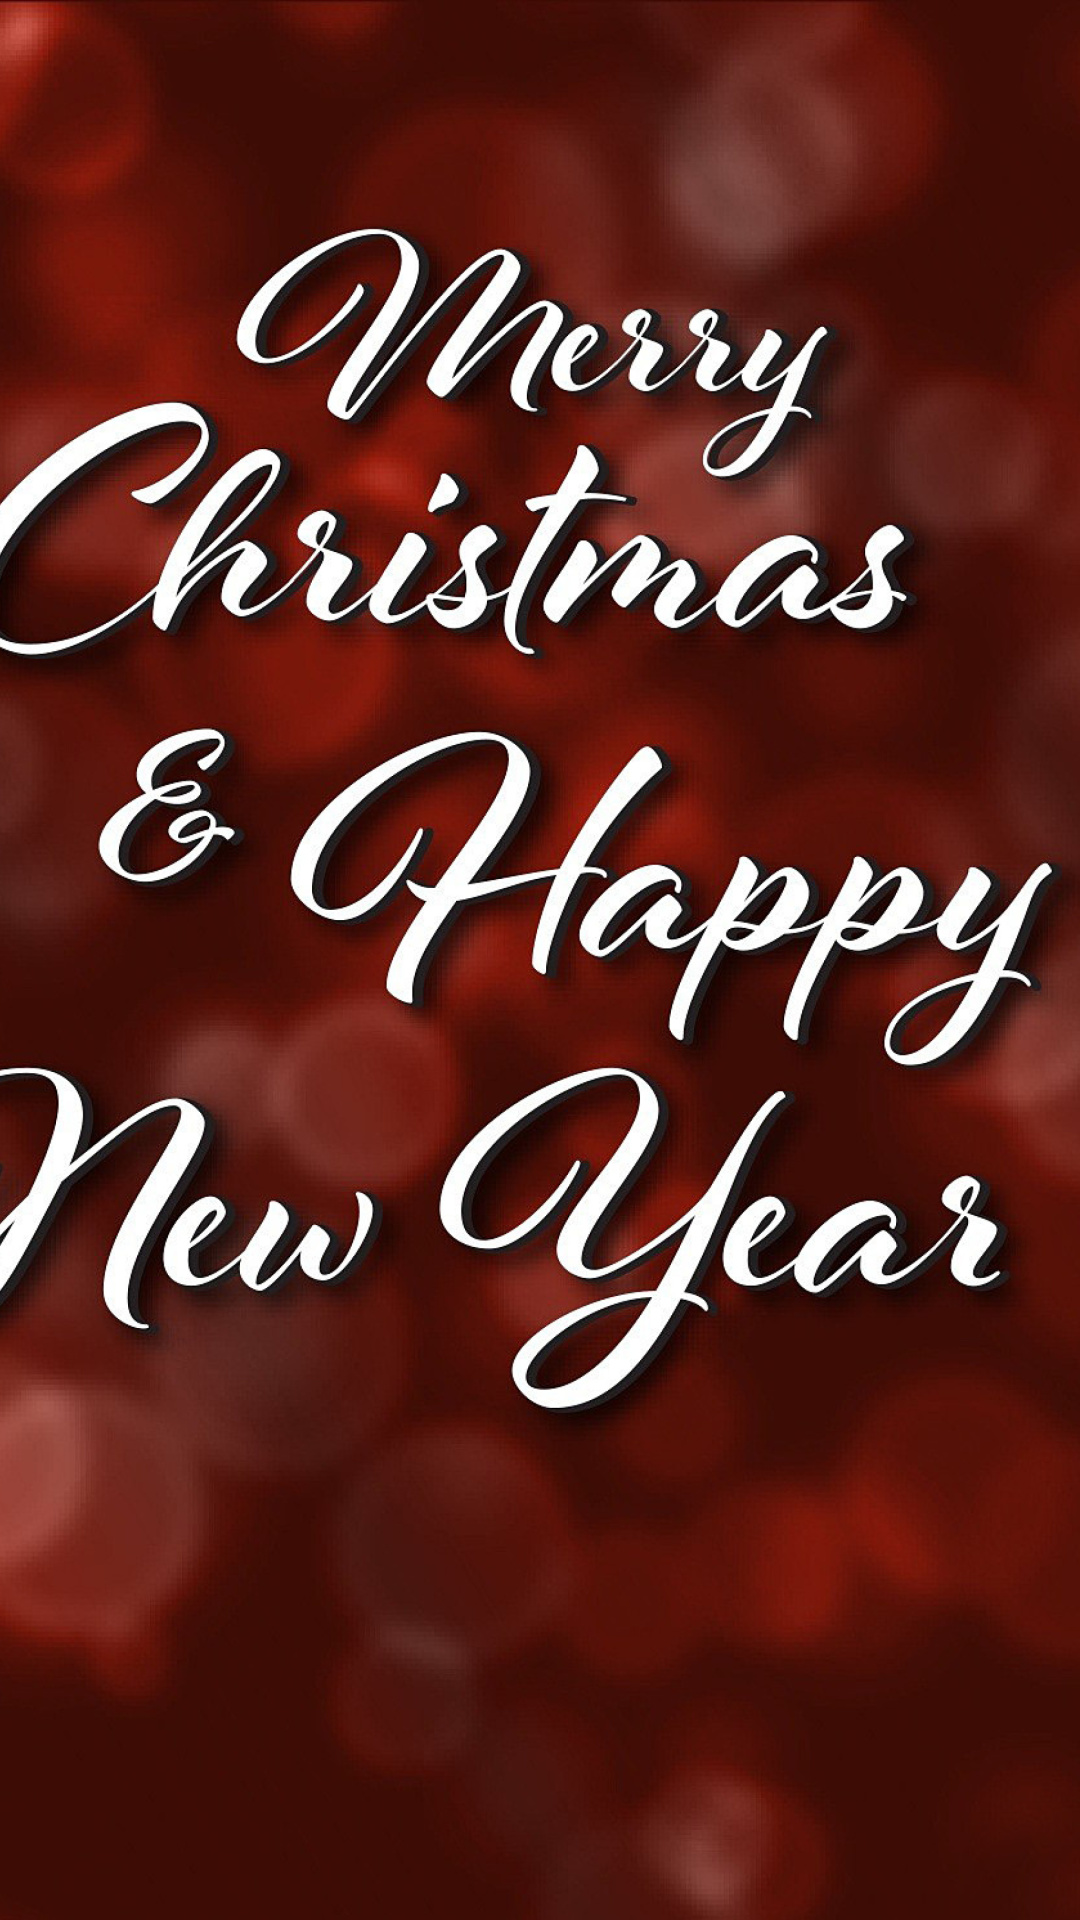 Merry Christmas and Best Wishes for a Happy New Year wallpaper 1080x1920